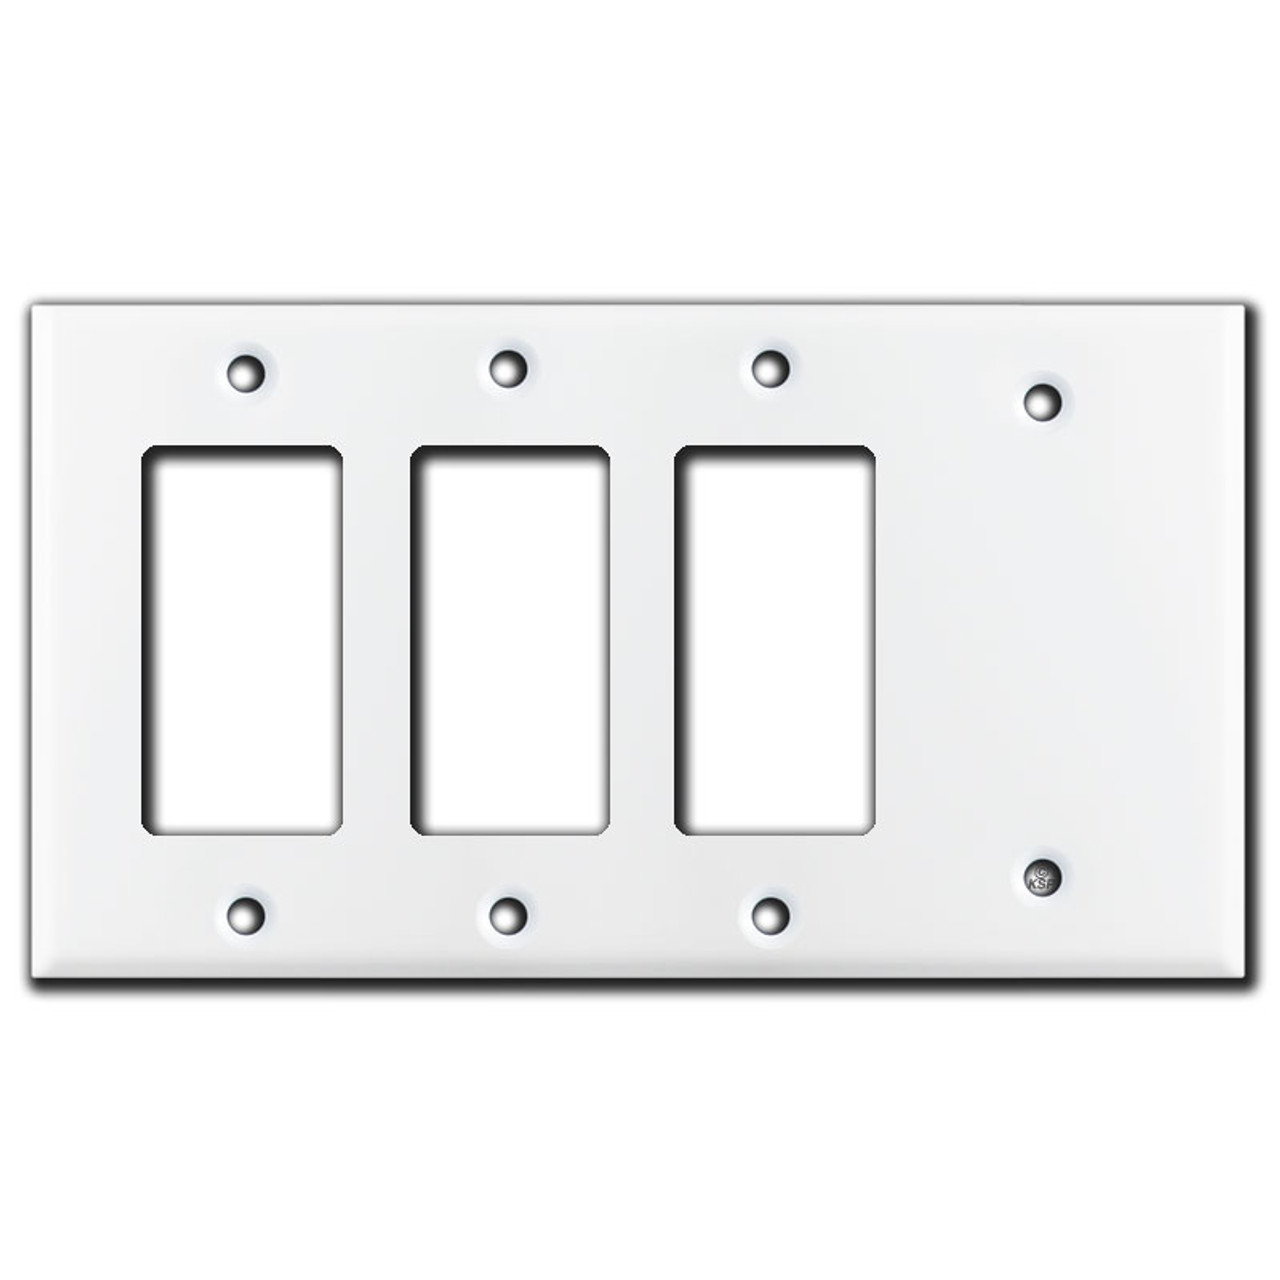 3 Pcs 1-Gang Blank Decora Filler Insert Wall Plate Cover Plastic Smooth White 